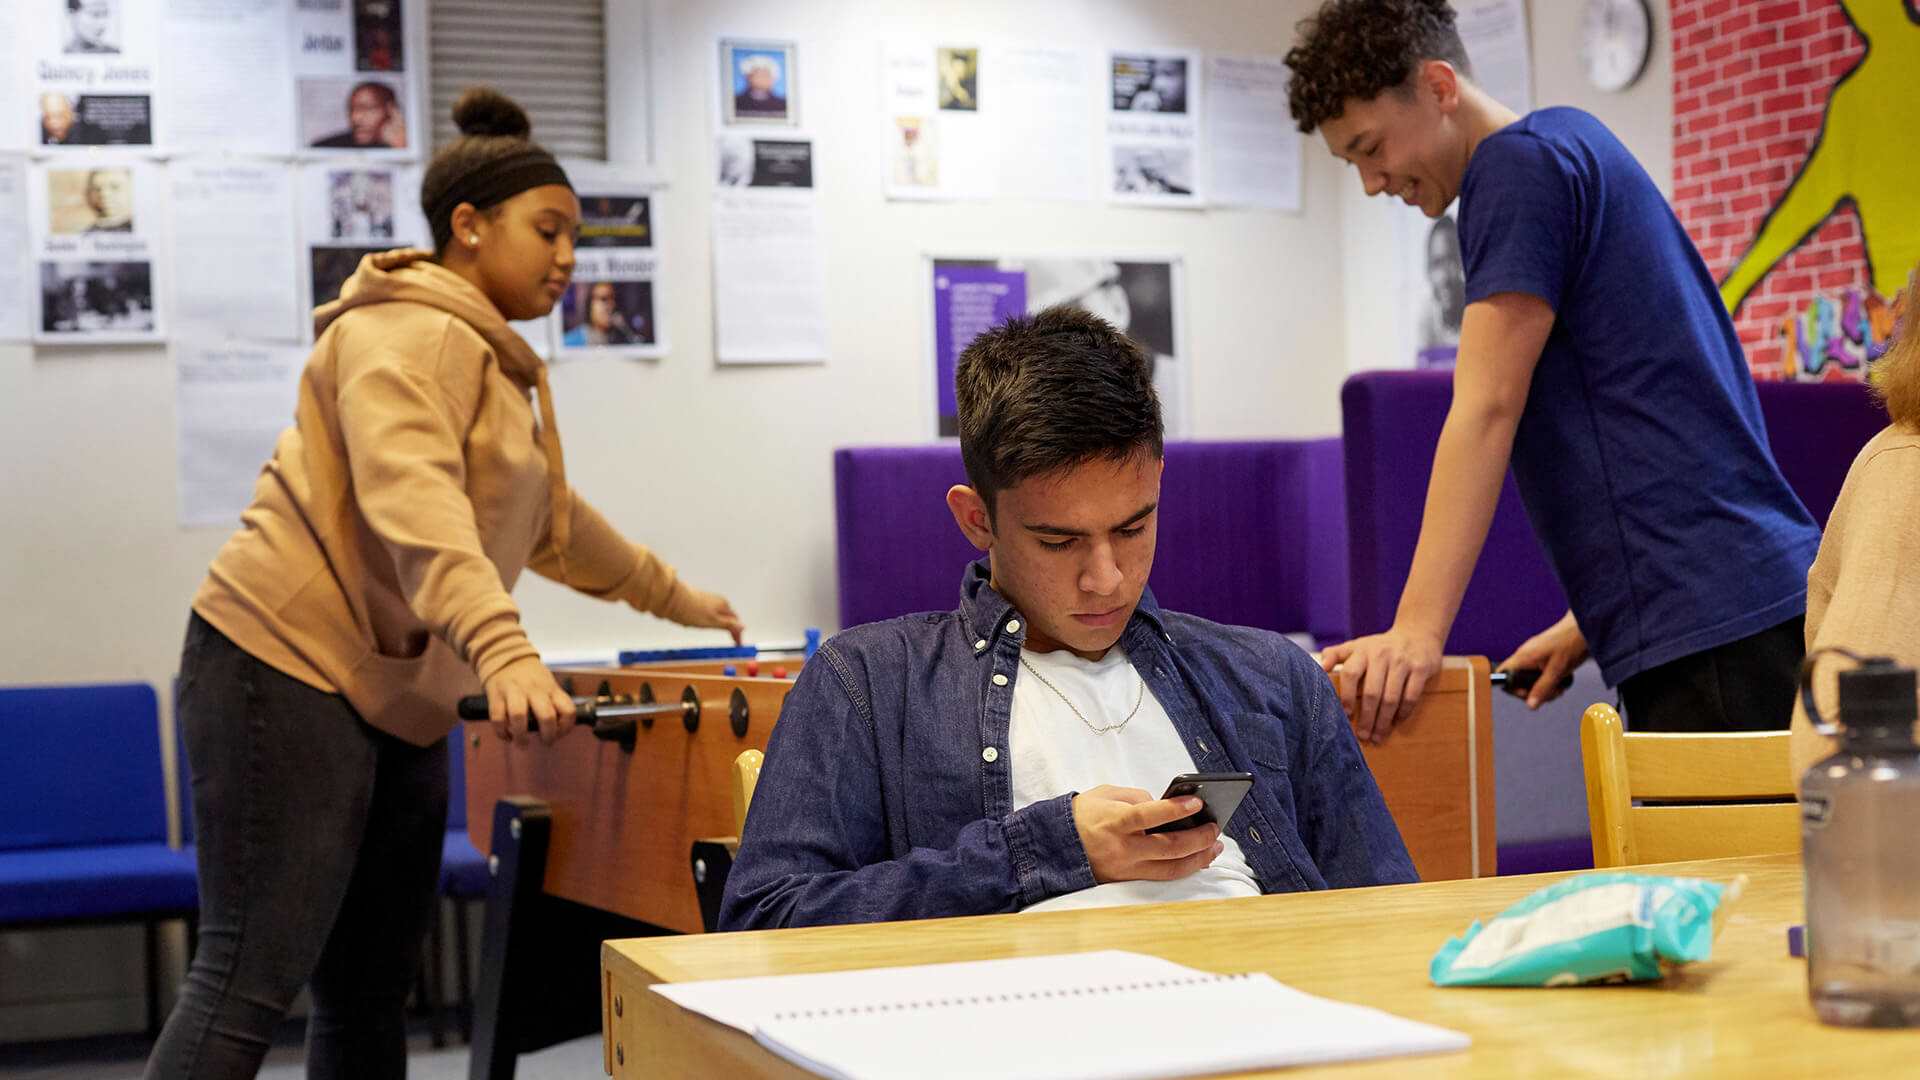 A young person is looking seriously down at his phone at a table in a common room. There are two young people behind him playing table top football, one of them is laughing.